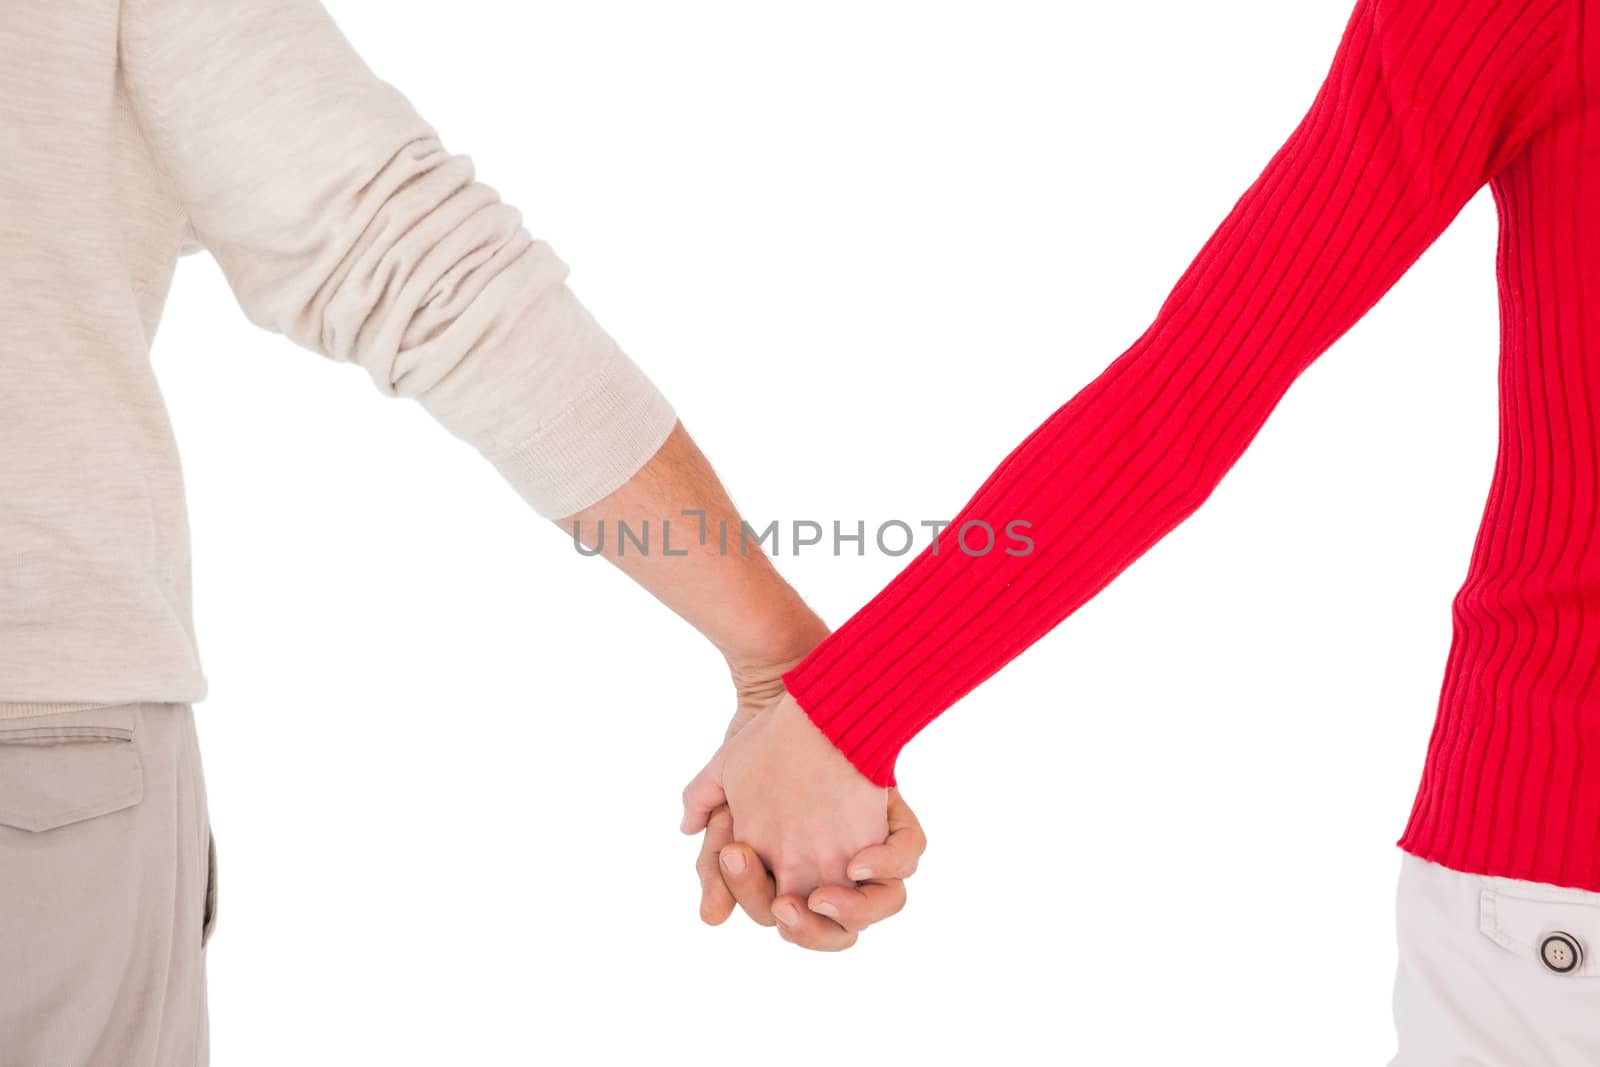 Couple holding hands rear view on white background